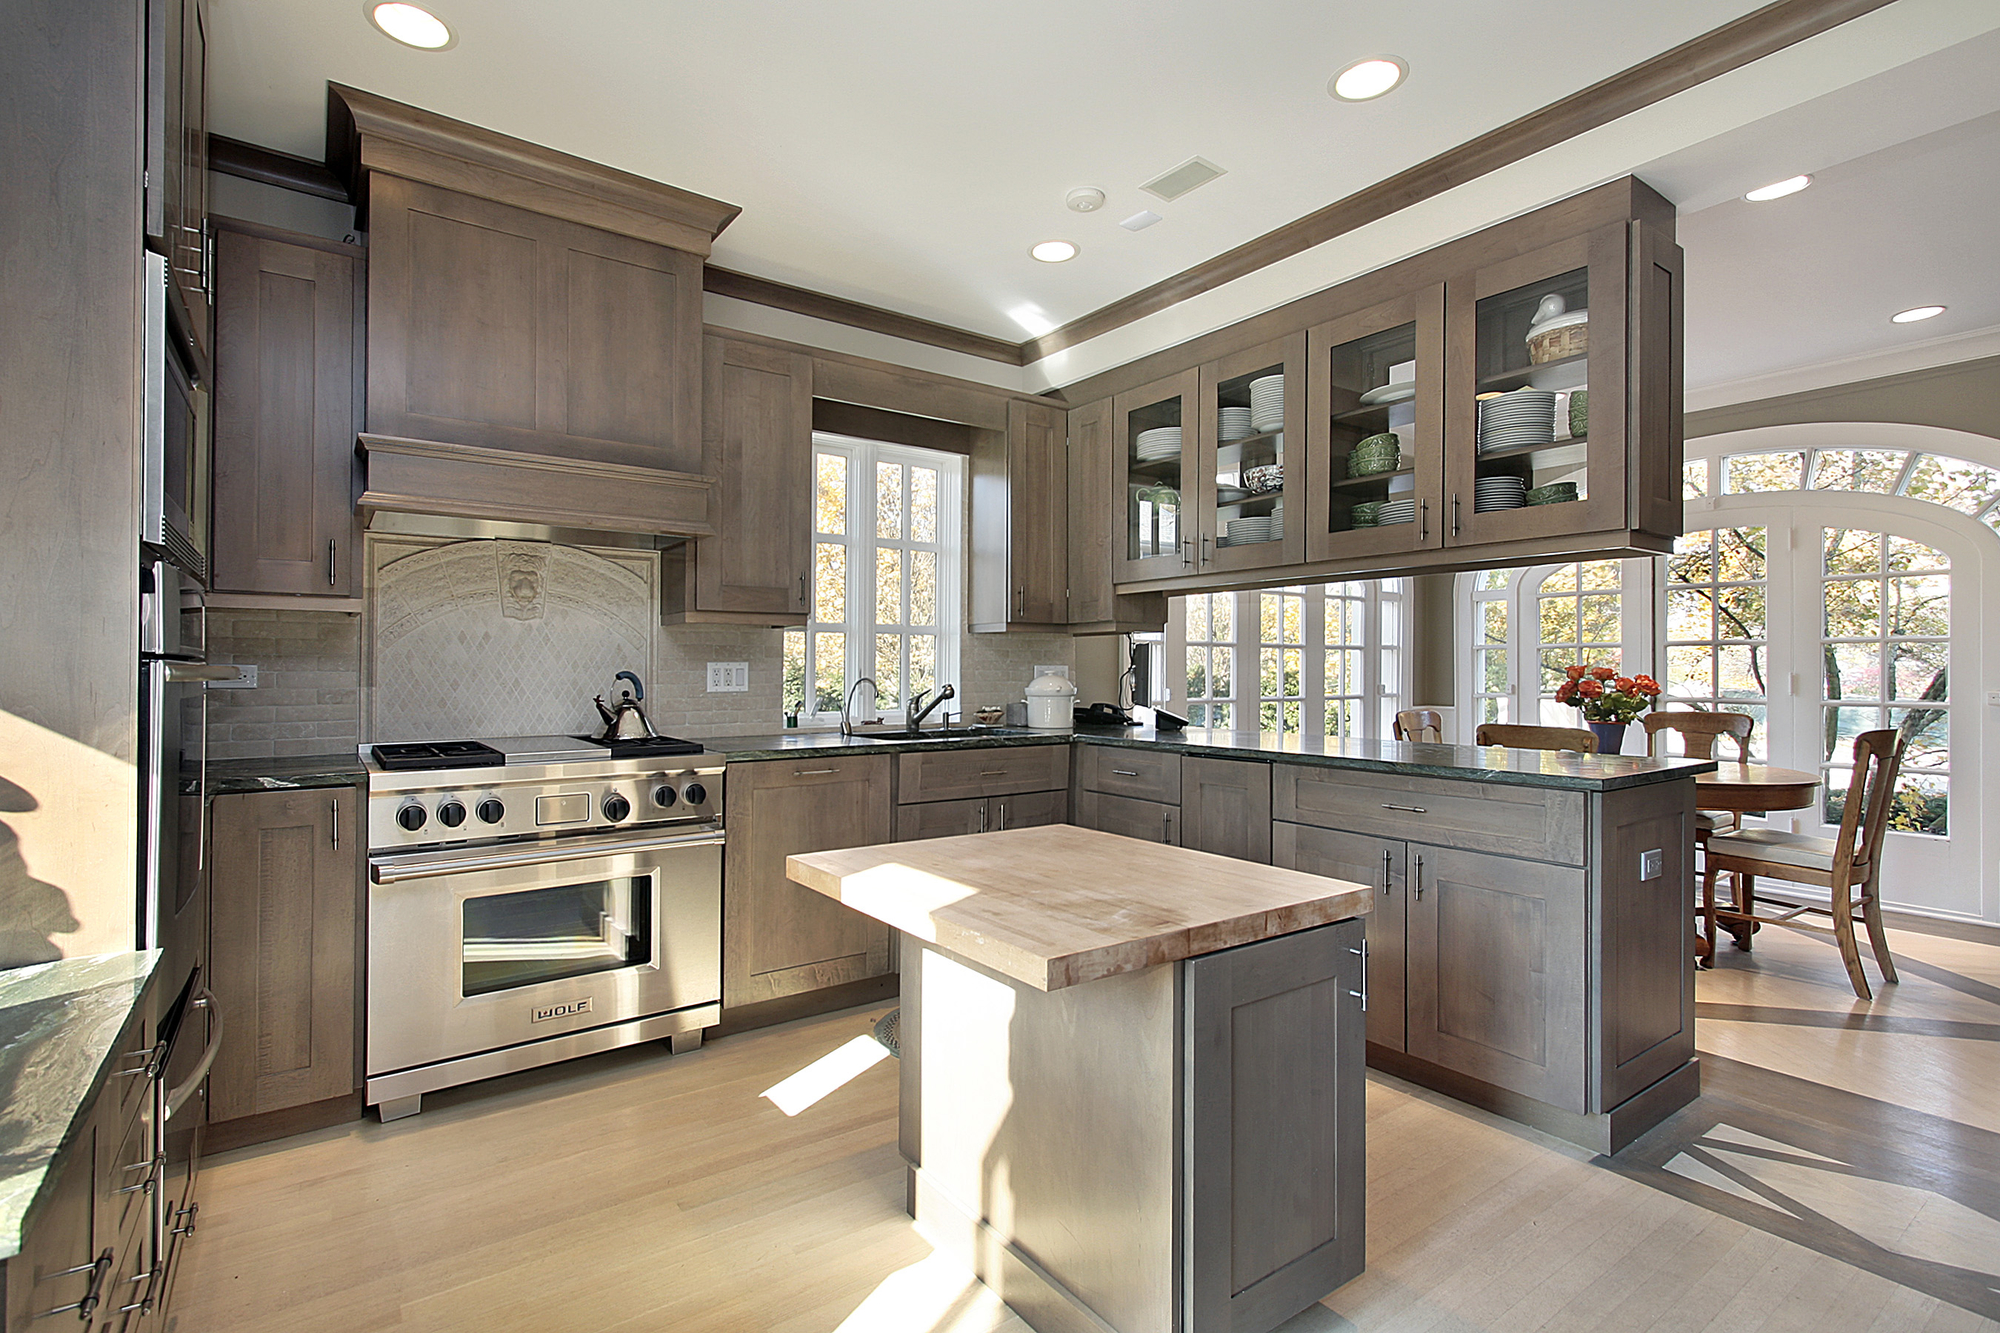 3 Tips For Choosing A Kitchen Cabinet Color Belleair Kitchen